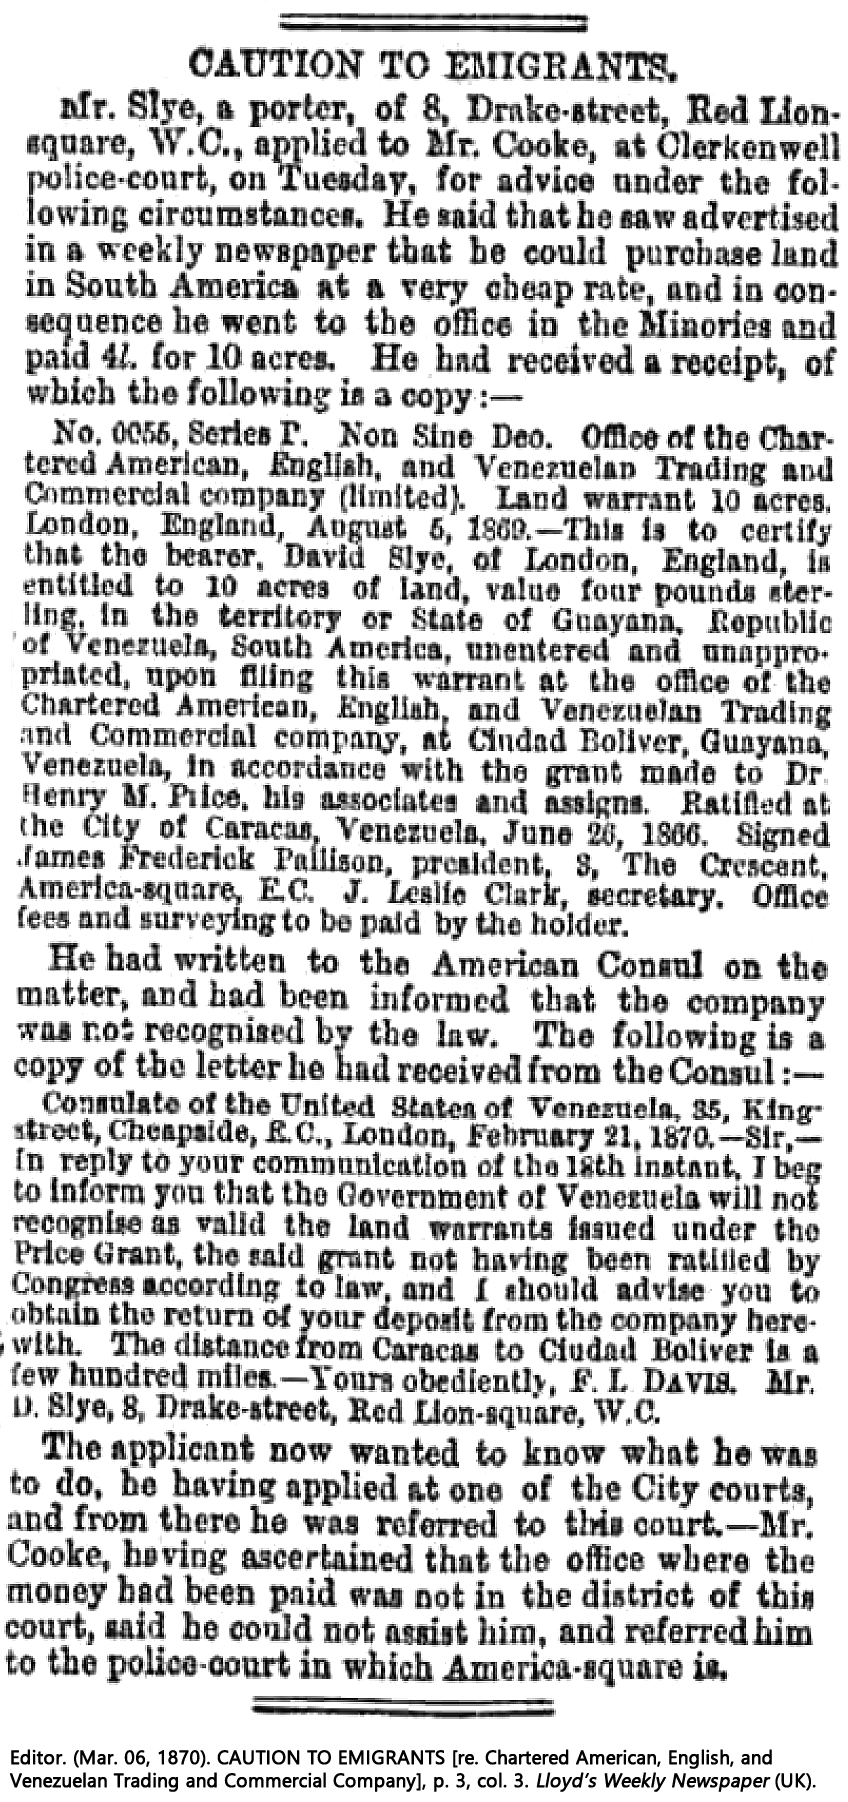 Editor. (Mar. 06, 1870). CAUTION TO EMIGRANTS [re. Chartered American, English, and Venezuelan Trading and Commercial Company], p. 3, col. 3. Lloyd's Weekly Newspaper.